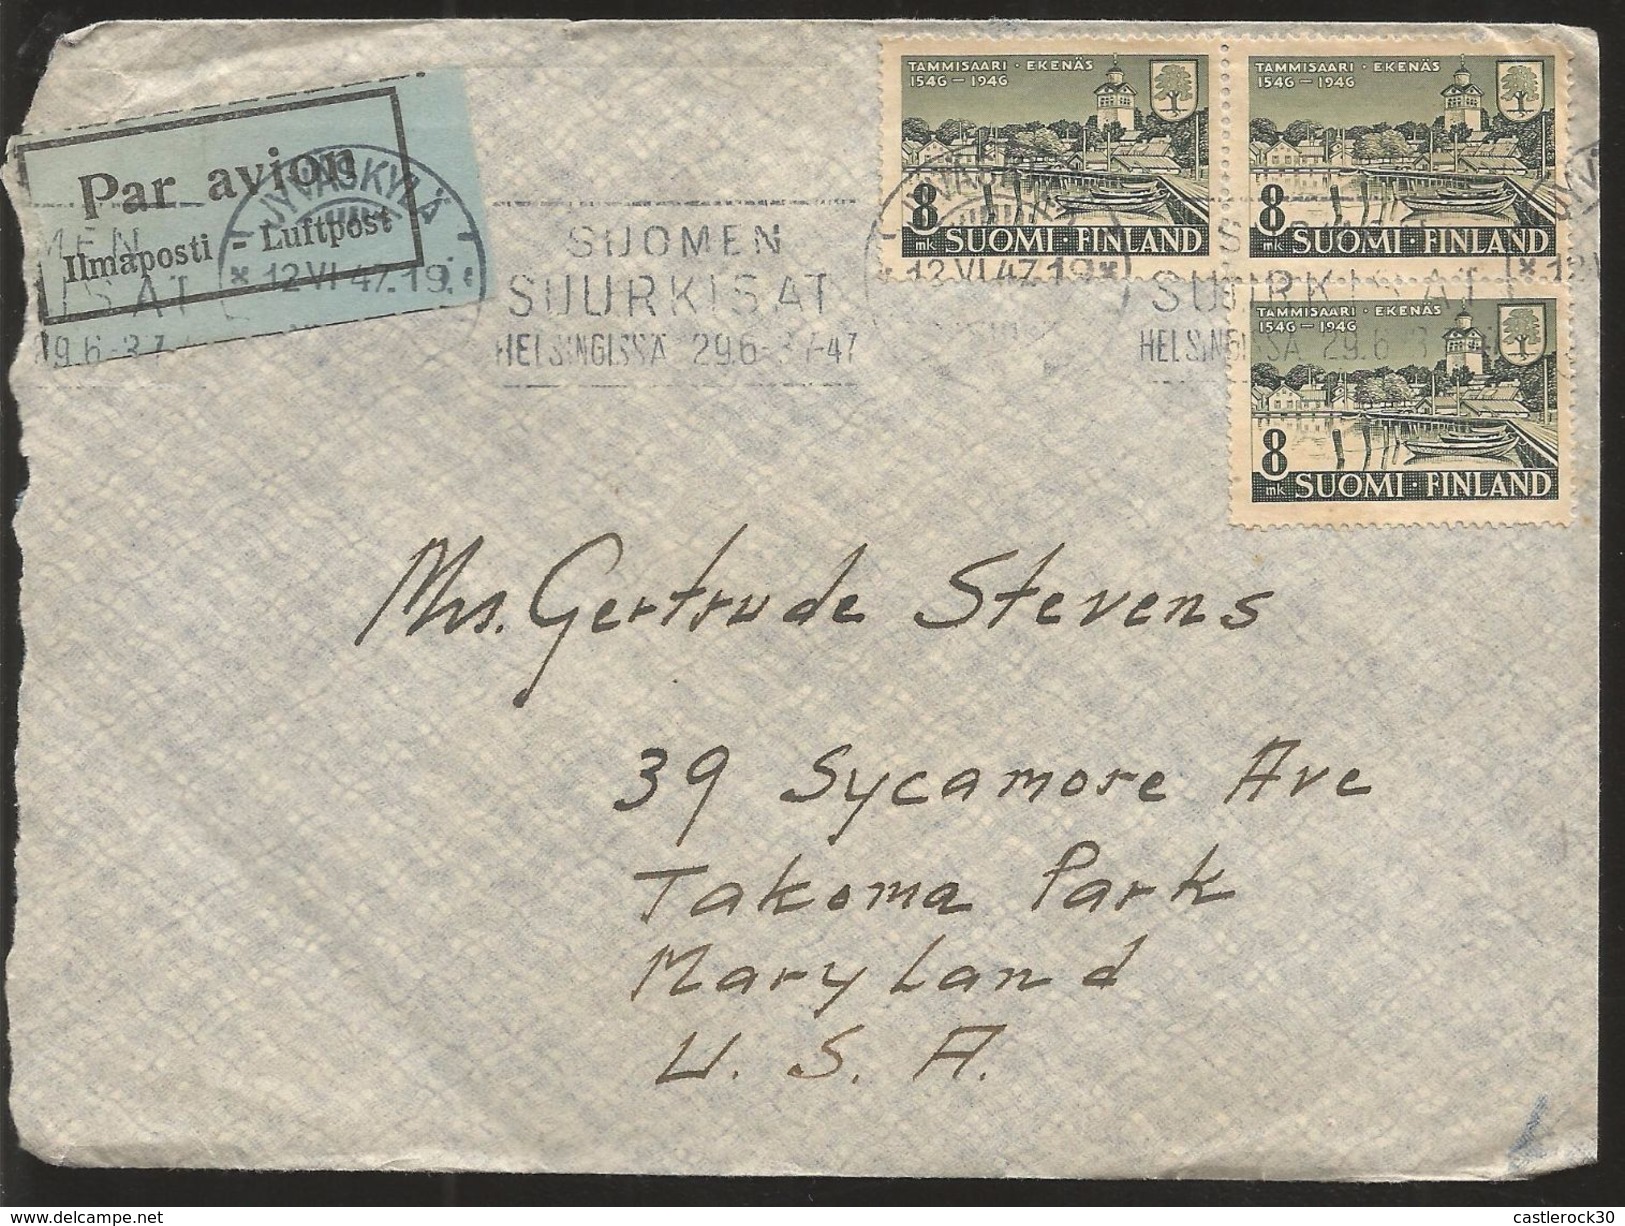 A) 1947 FINLAND, TOWN OF TAMISAARI, SEA, ARCHITECTURE, BOAT, CIRCULATED COVER FROM FINLAND TO USA. - Usati